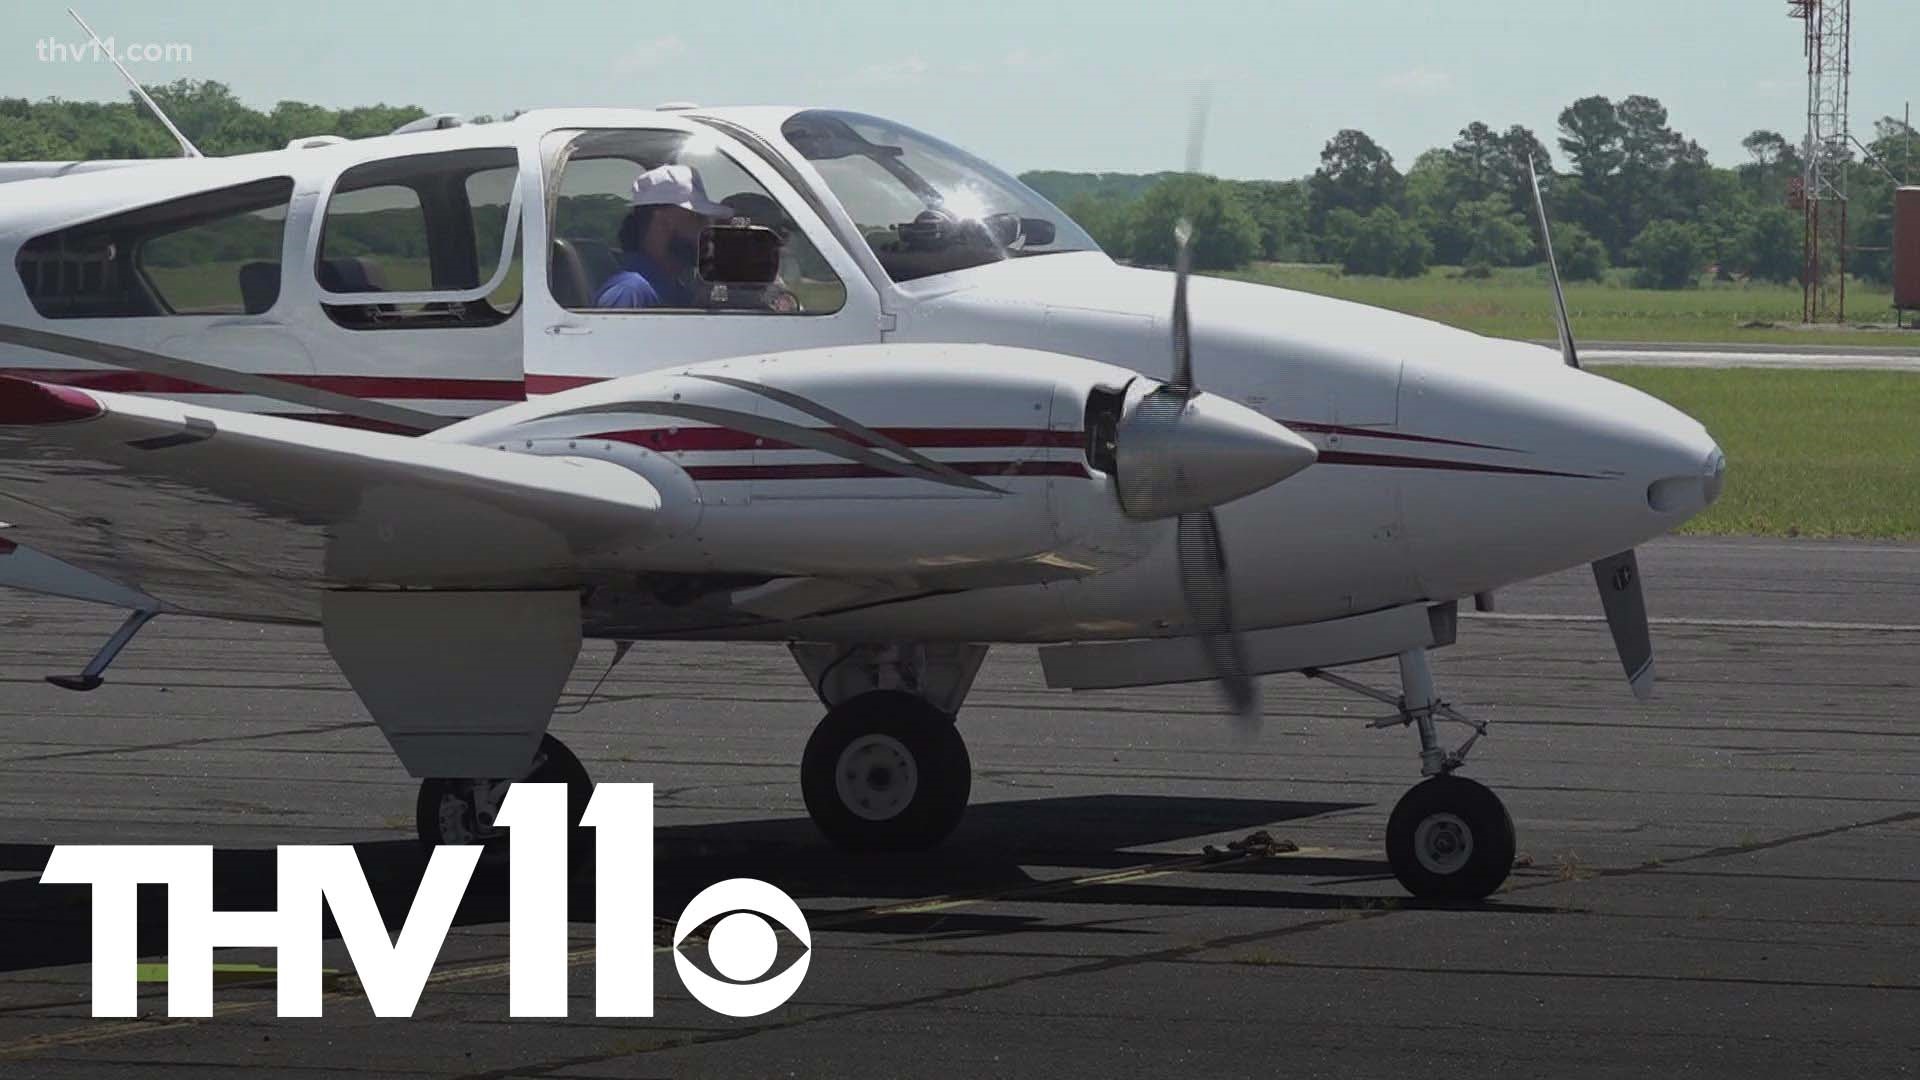 After two years away, the Black Pilots of America are back in Pine Bluff and hoping to inspire the next generation's interest in aviation.